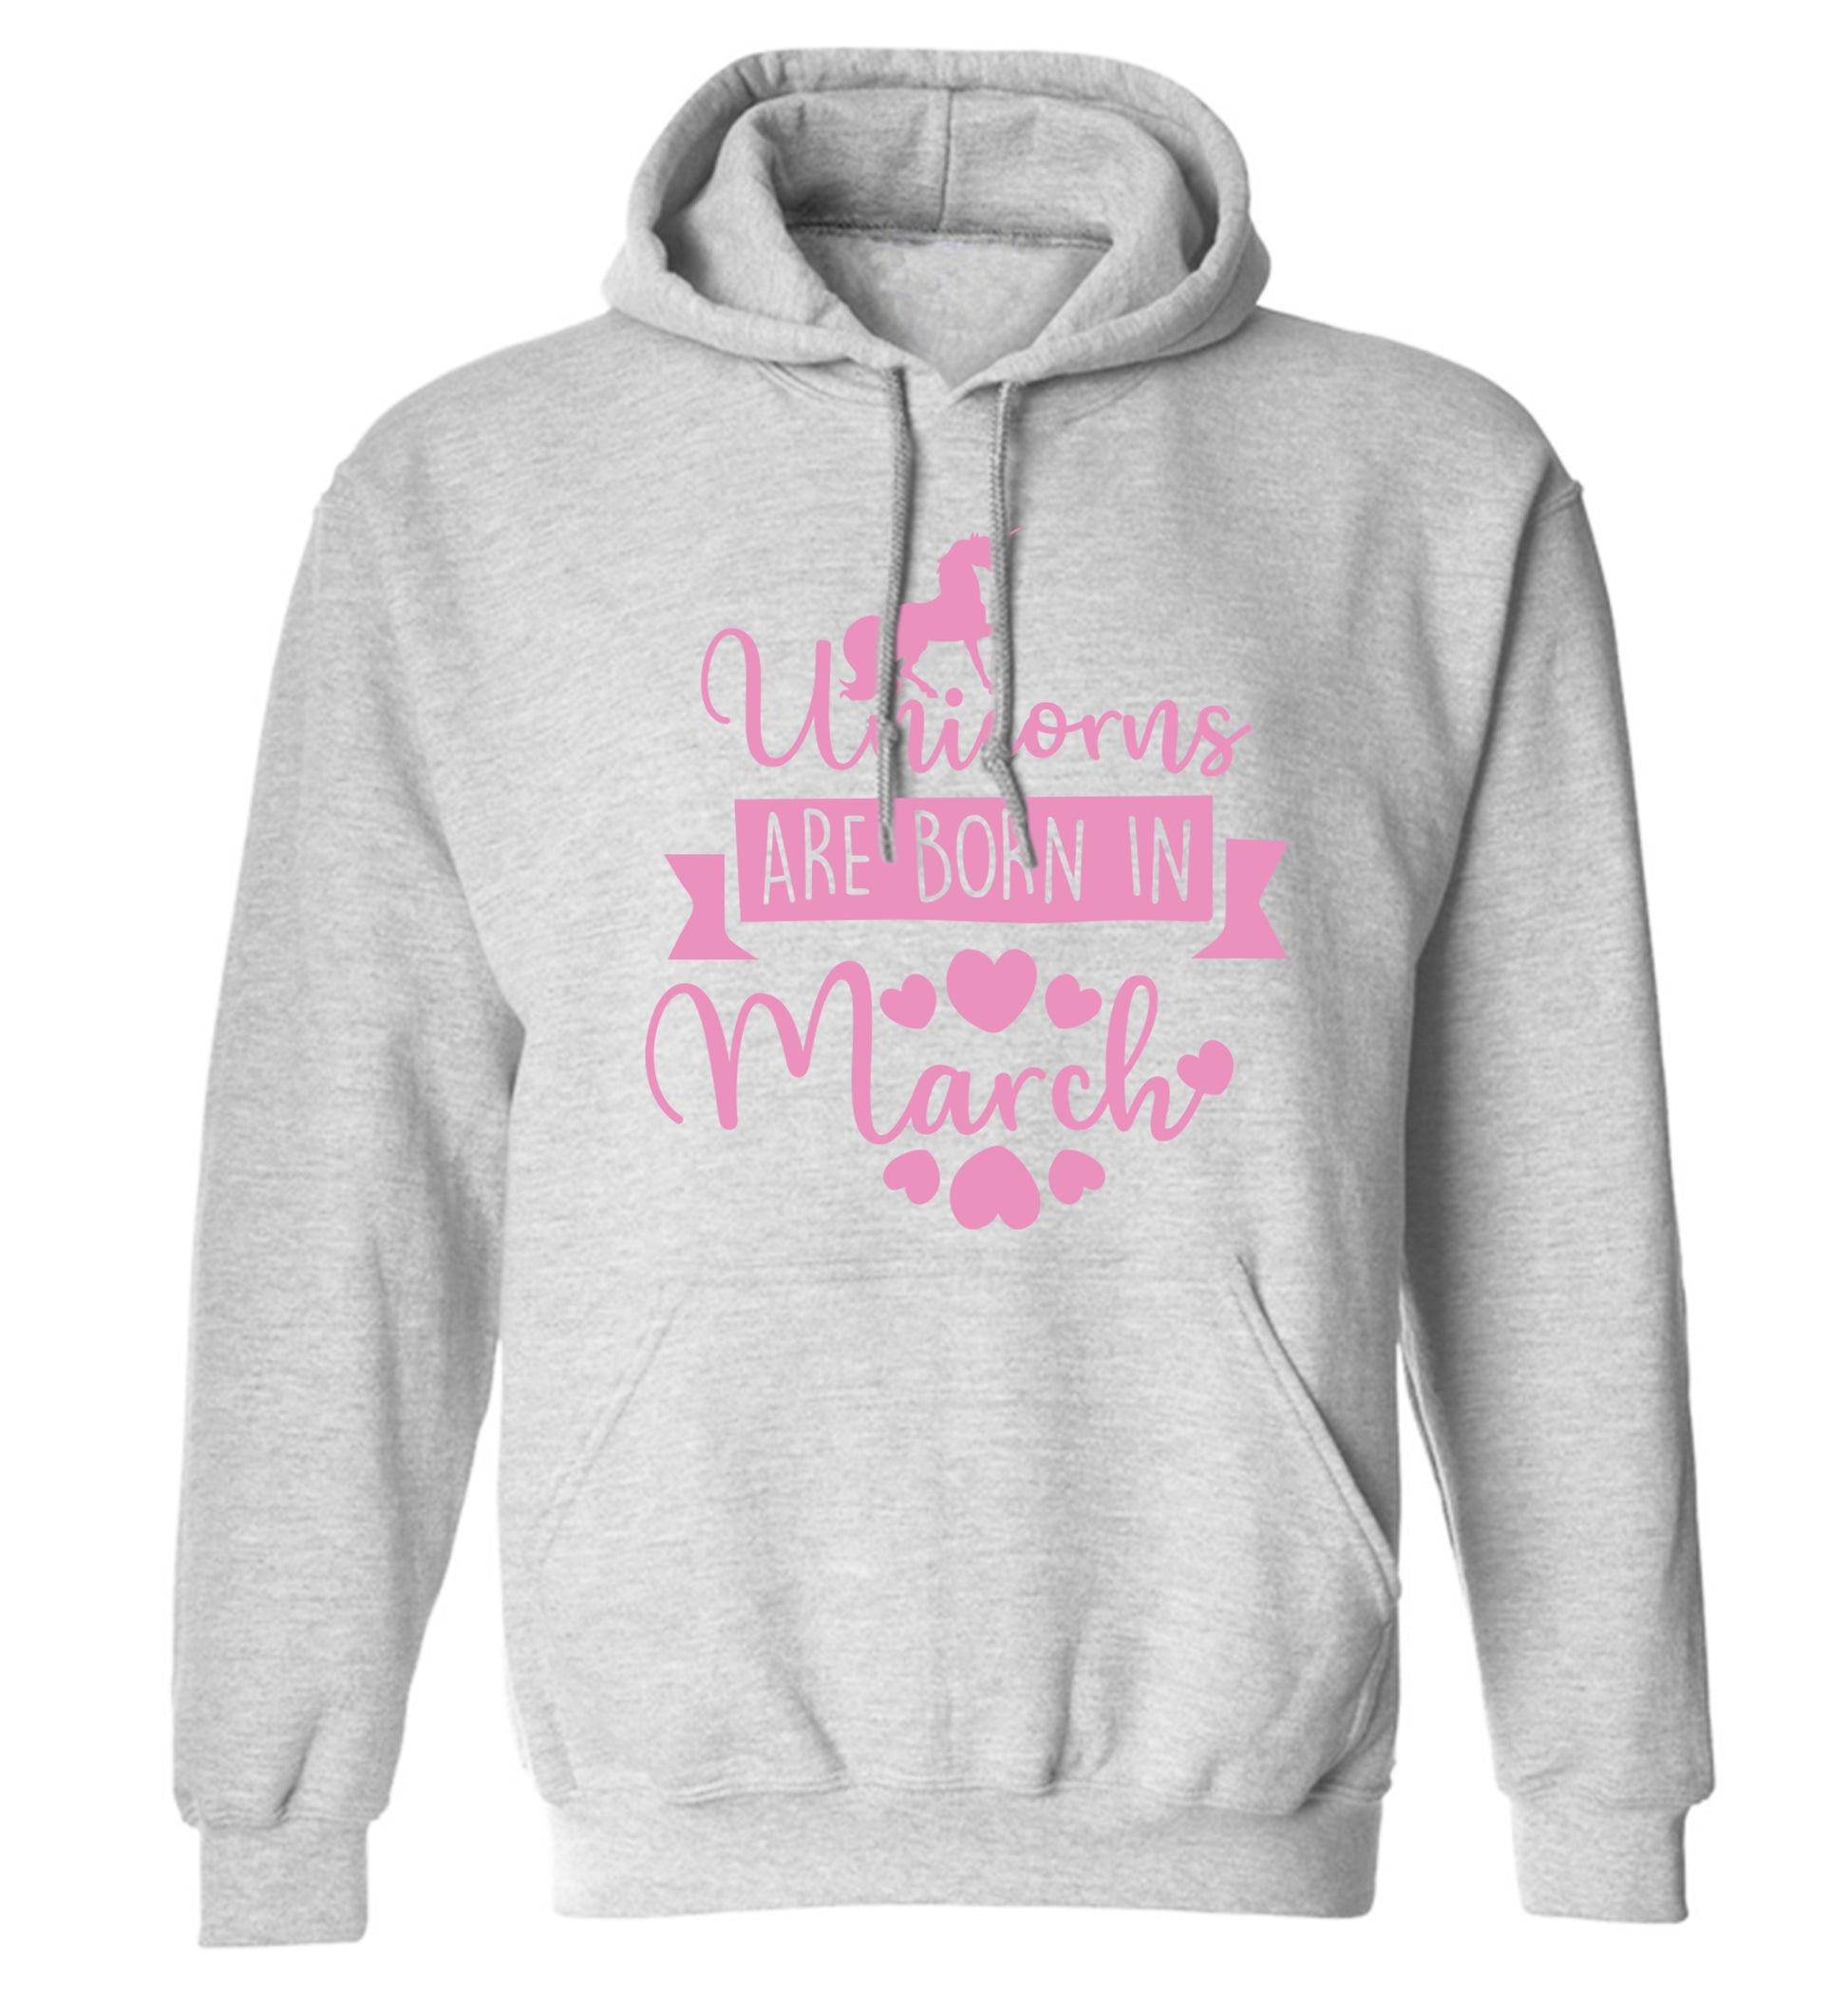 Unicorns are born in March adults unisex grey hoodie 2XL